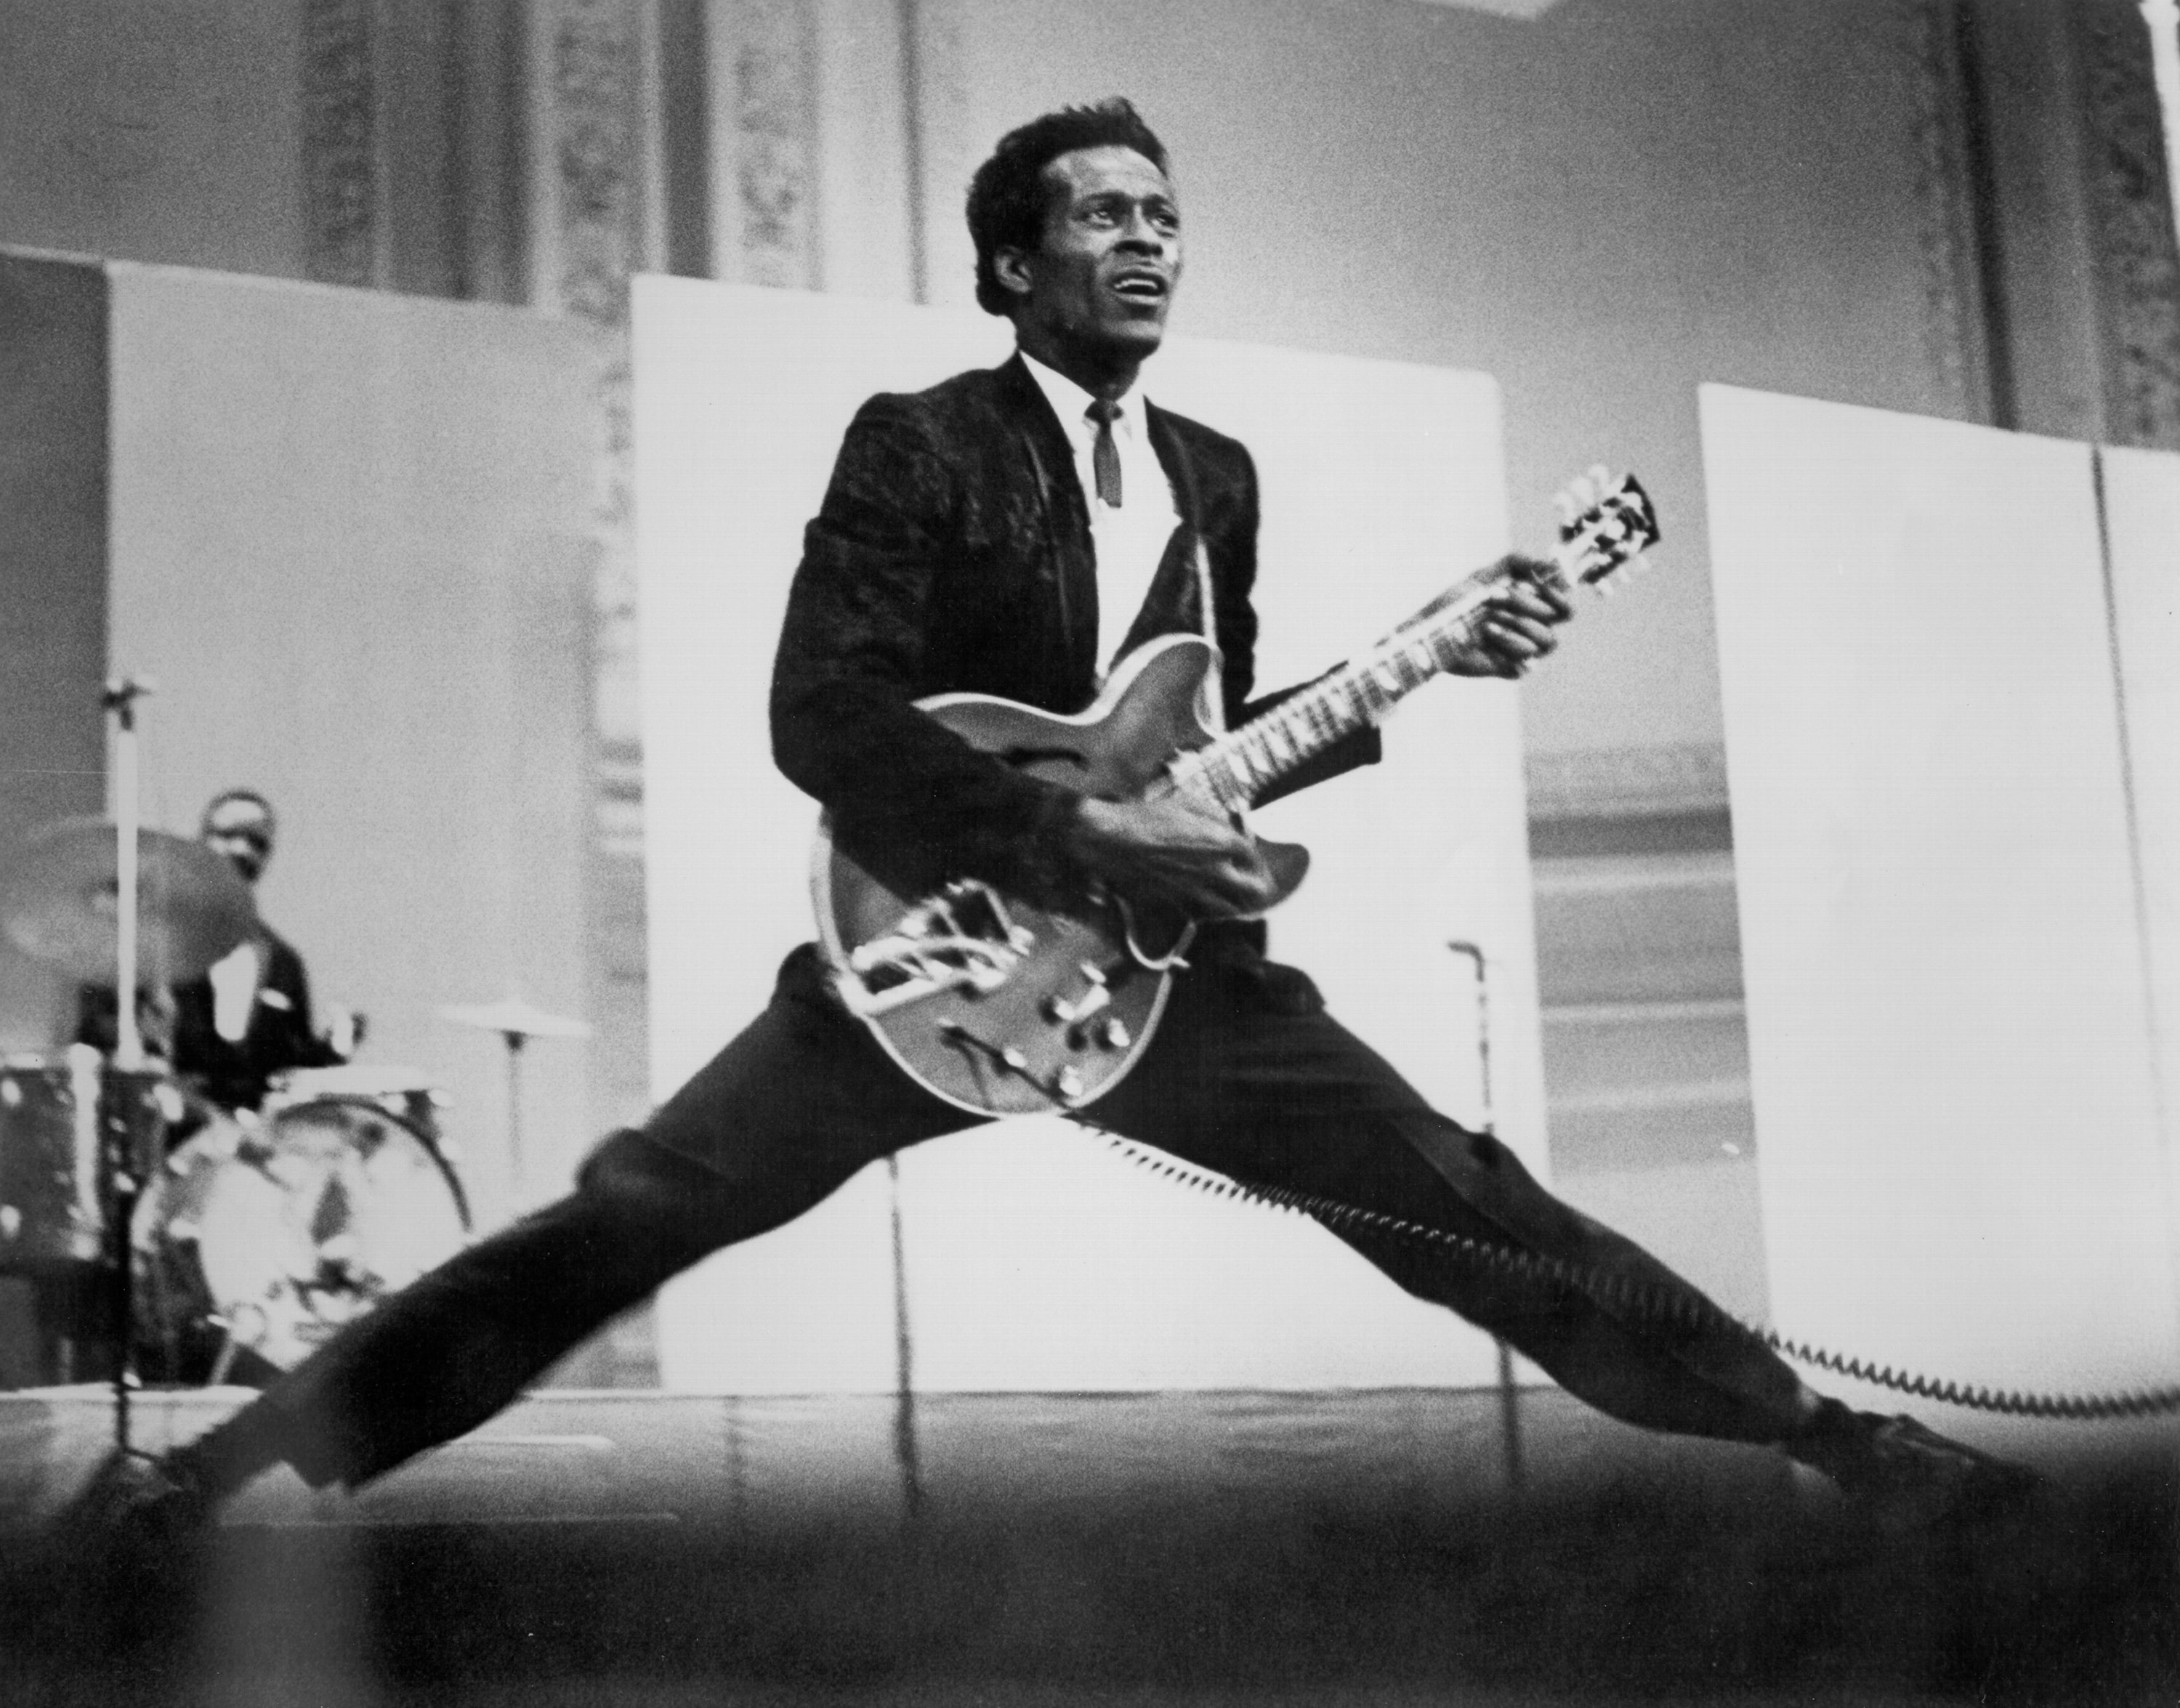 Chuck Berry playing songs on his guitar